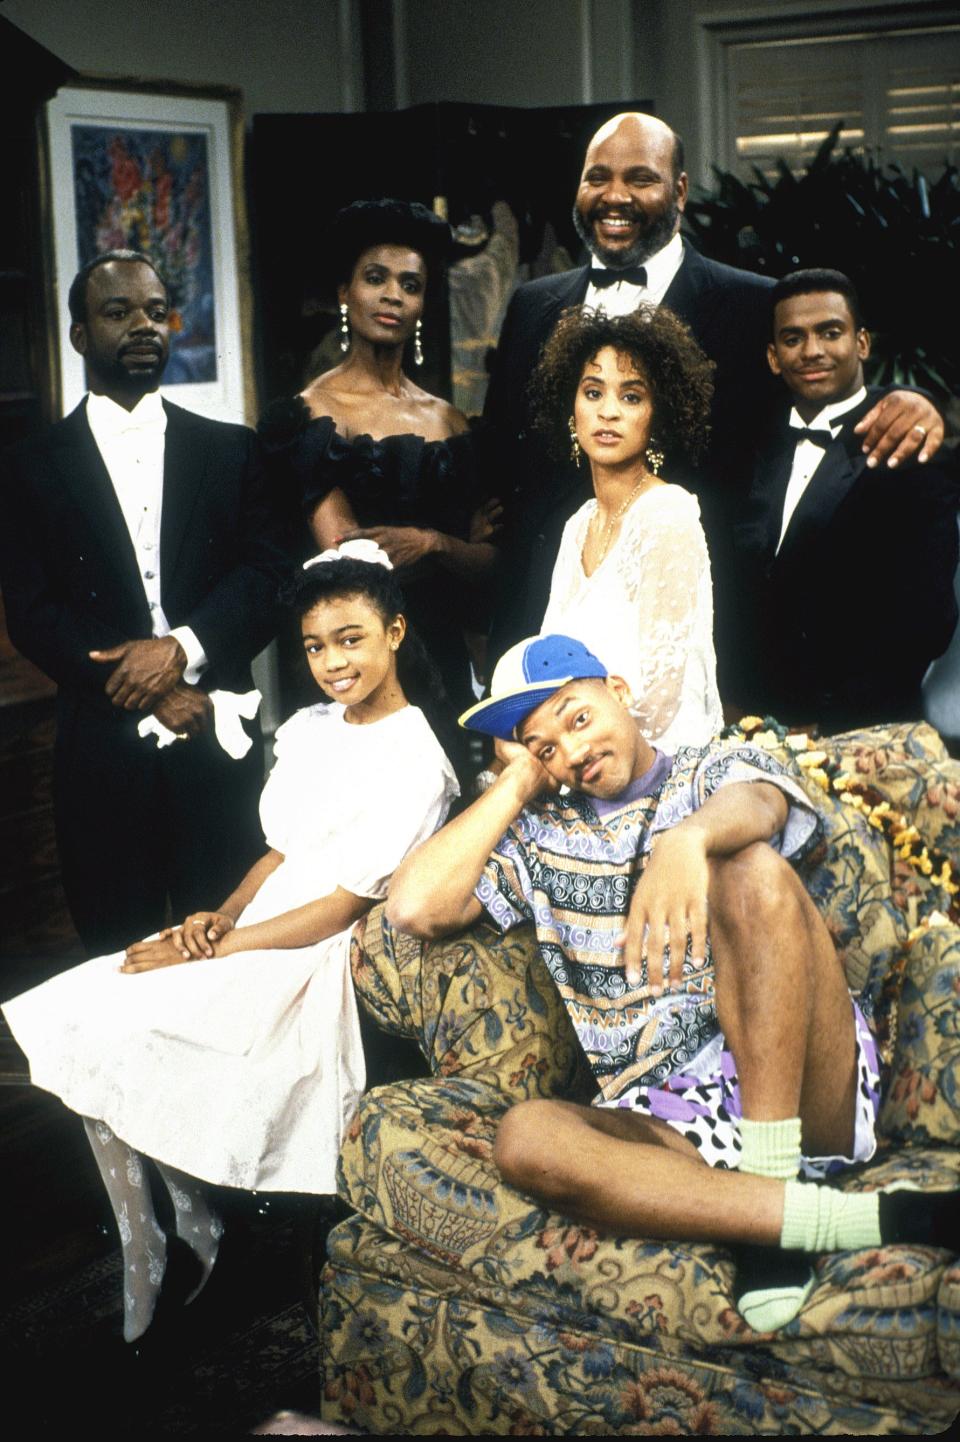 Janet Hubert, the actress who originated the role of Vivian Banks (second from left), with her co-stars (left to right) Joseph Marcell, James Avery, Karyn Parsons, Alfonso Ribeiro, (front row) Tatyana Ali and Will Smith.